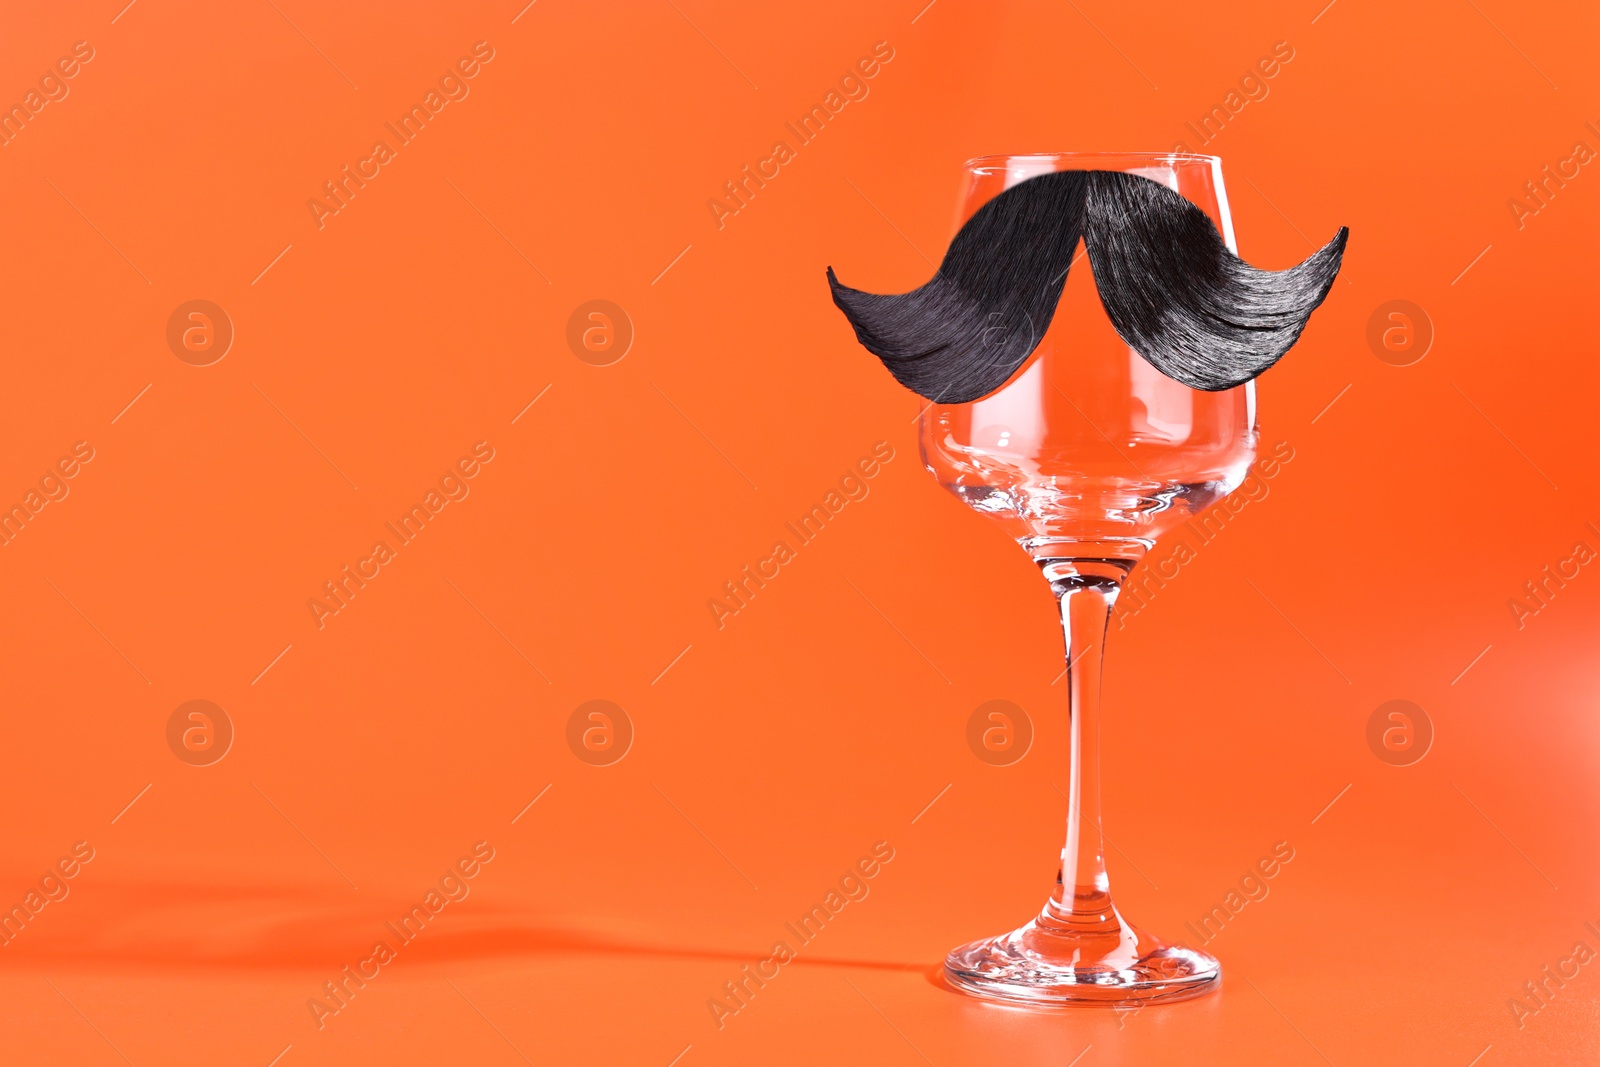 Photo of Man's face made of artificial mustache and wine glass on orange background. Space for text